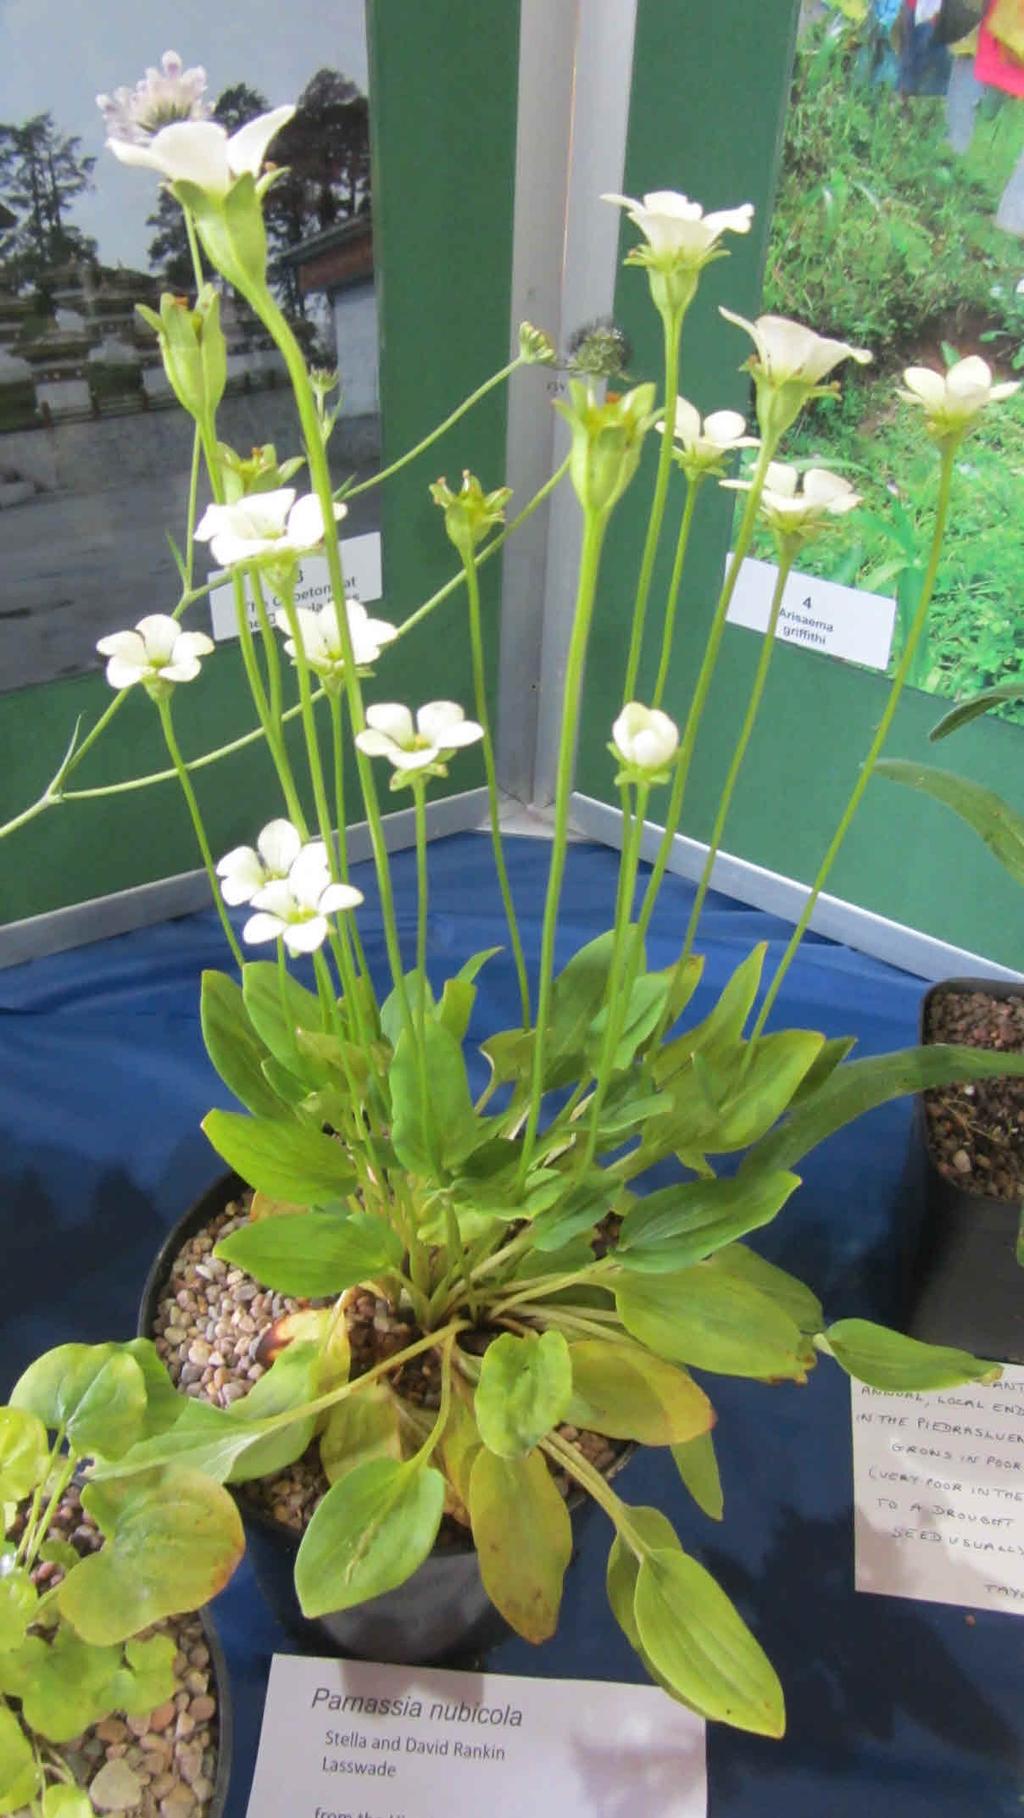 On the left is Parnassia wrightiana from